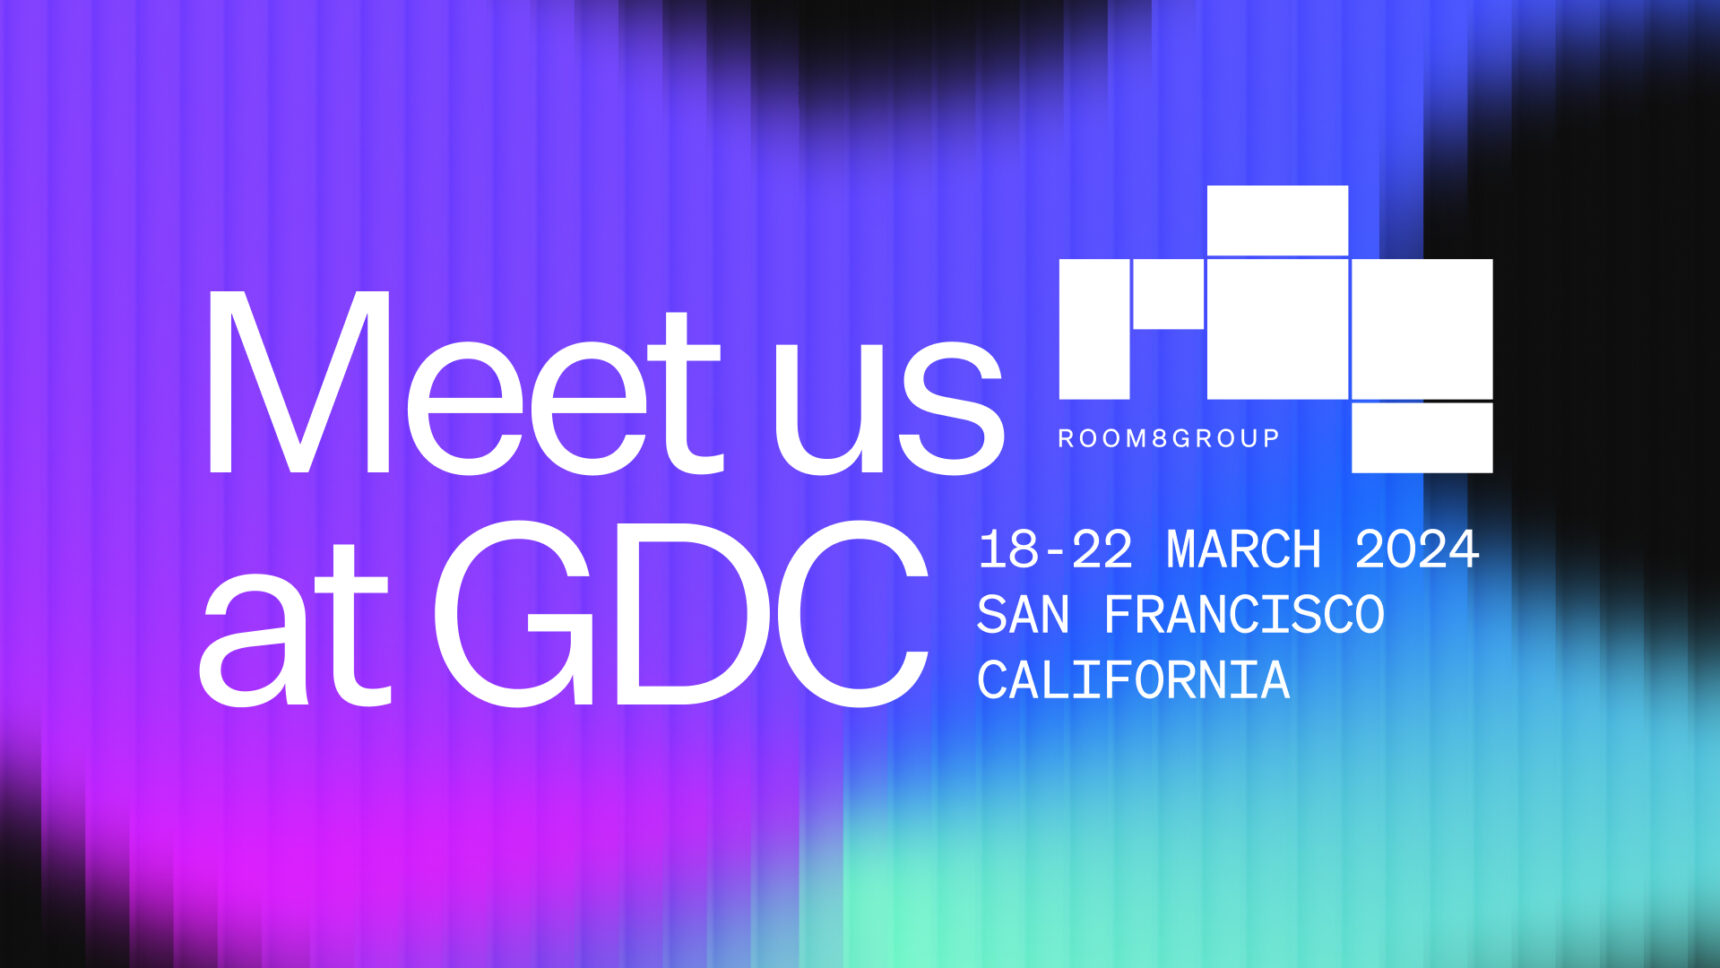 Room 8 Group Will Attend Game Developers Conference 2024—See You in San Francisco!